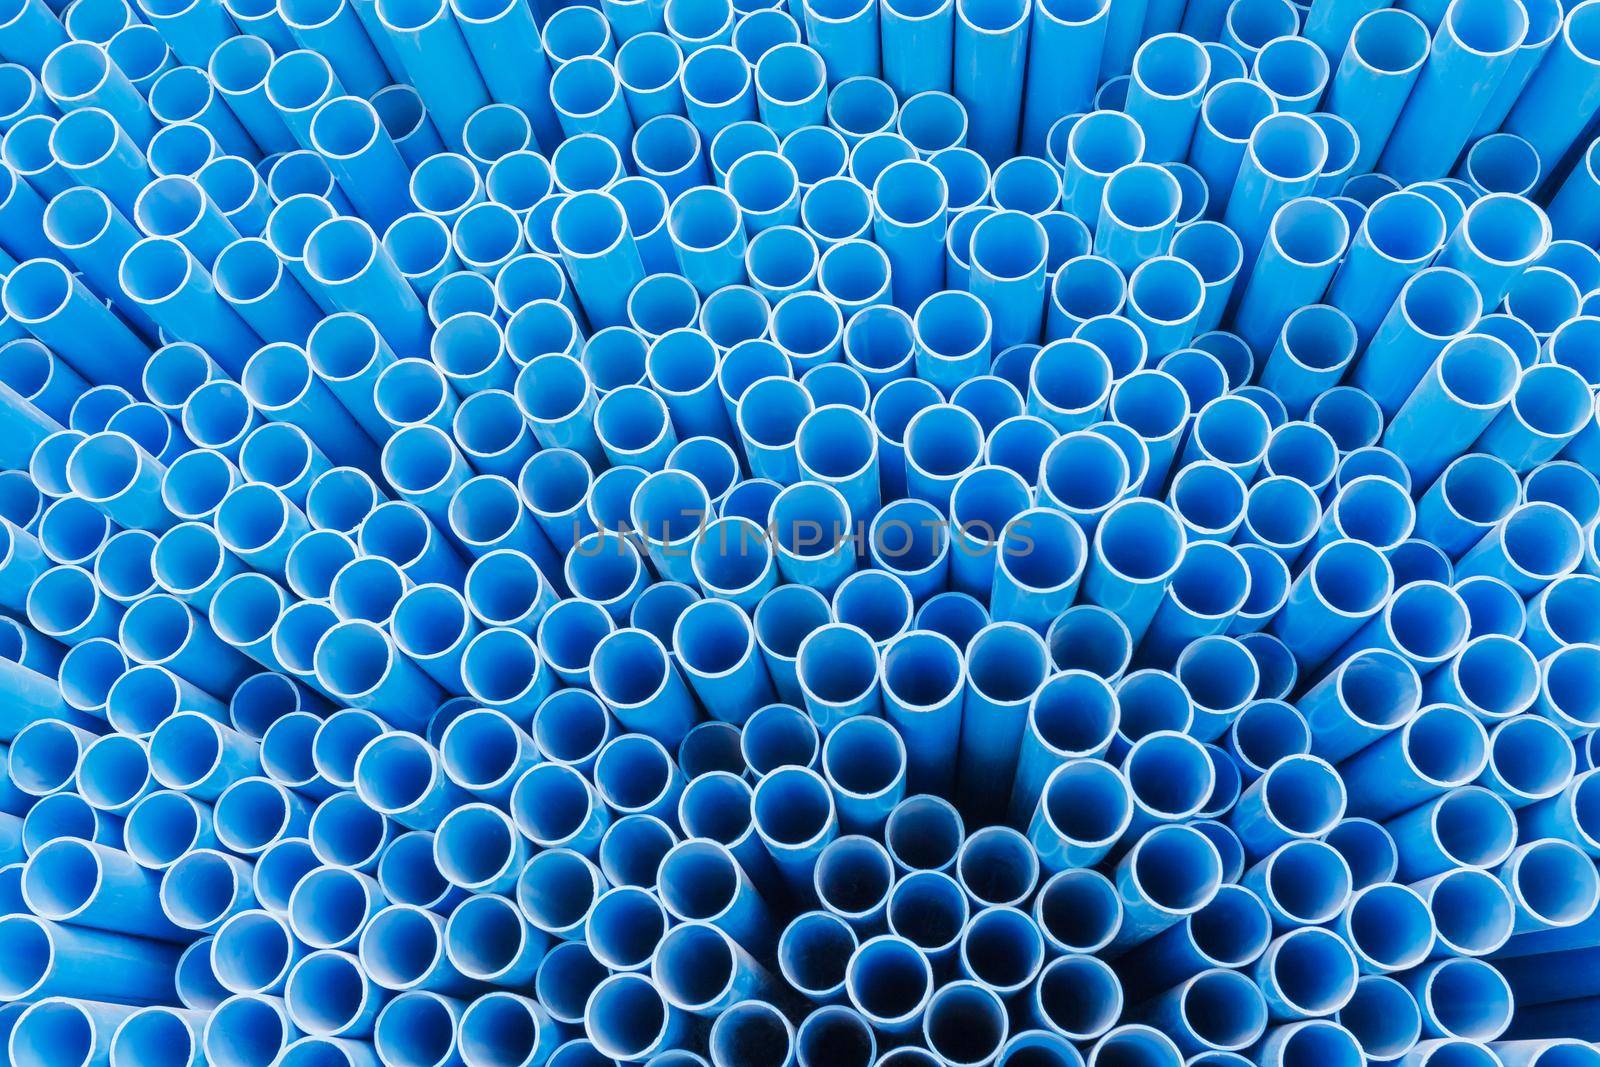 PVC pipes stacking on shelf in warehouse